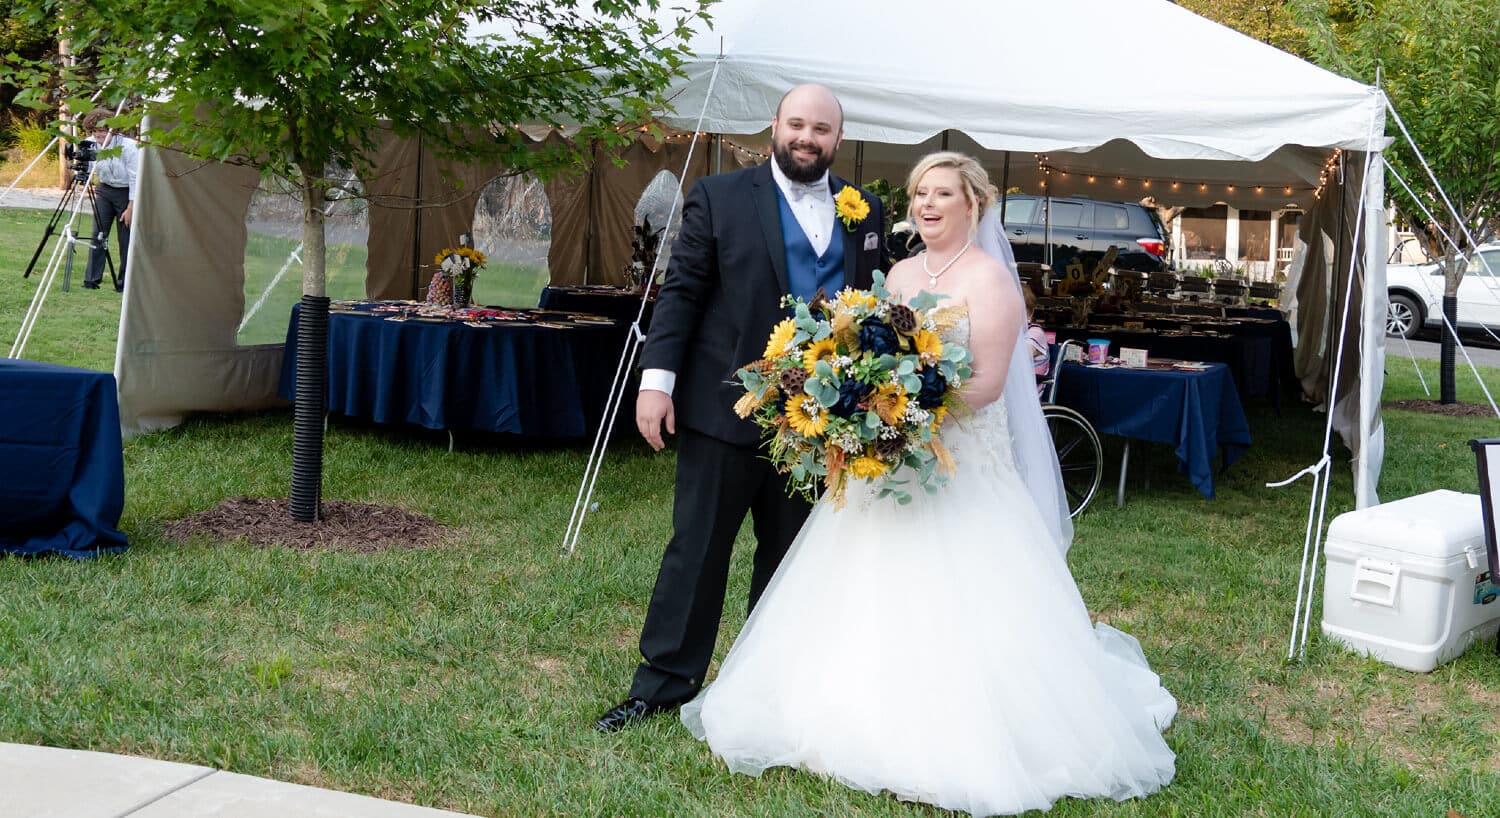 Smiling couple with bride holding large bouquet of sunflowers and others in front of white reception tent setup in yard.